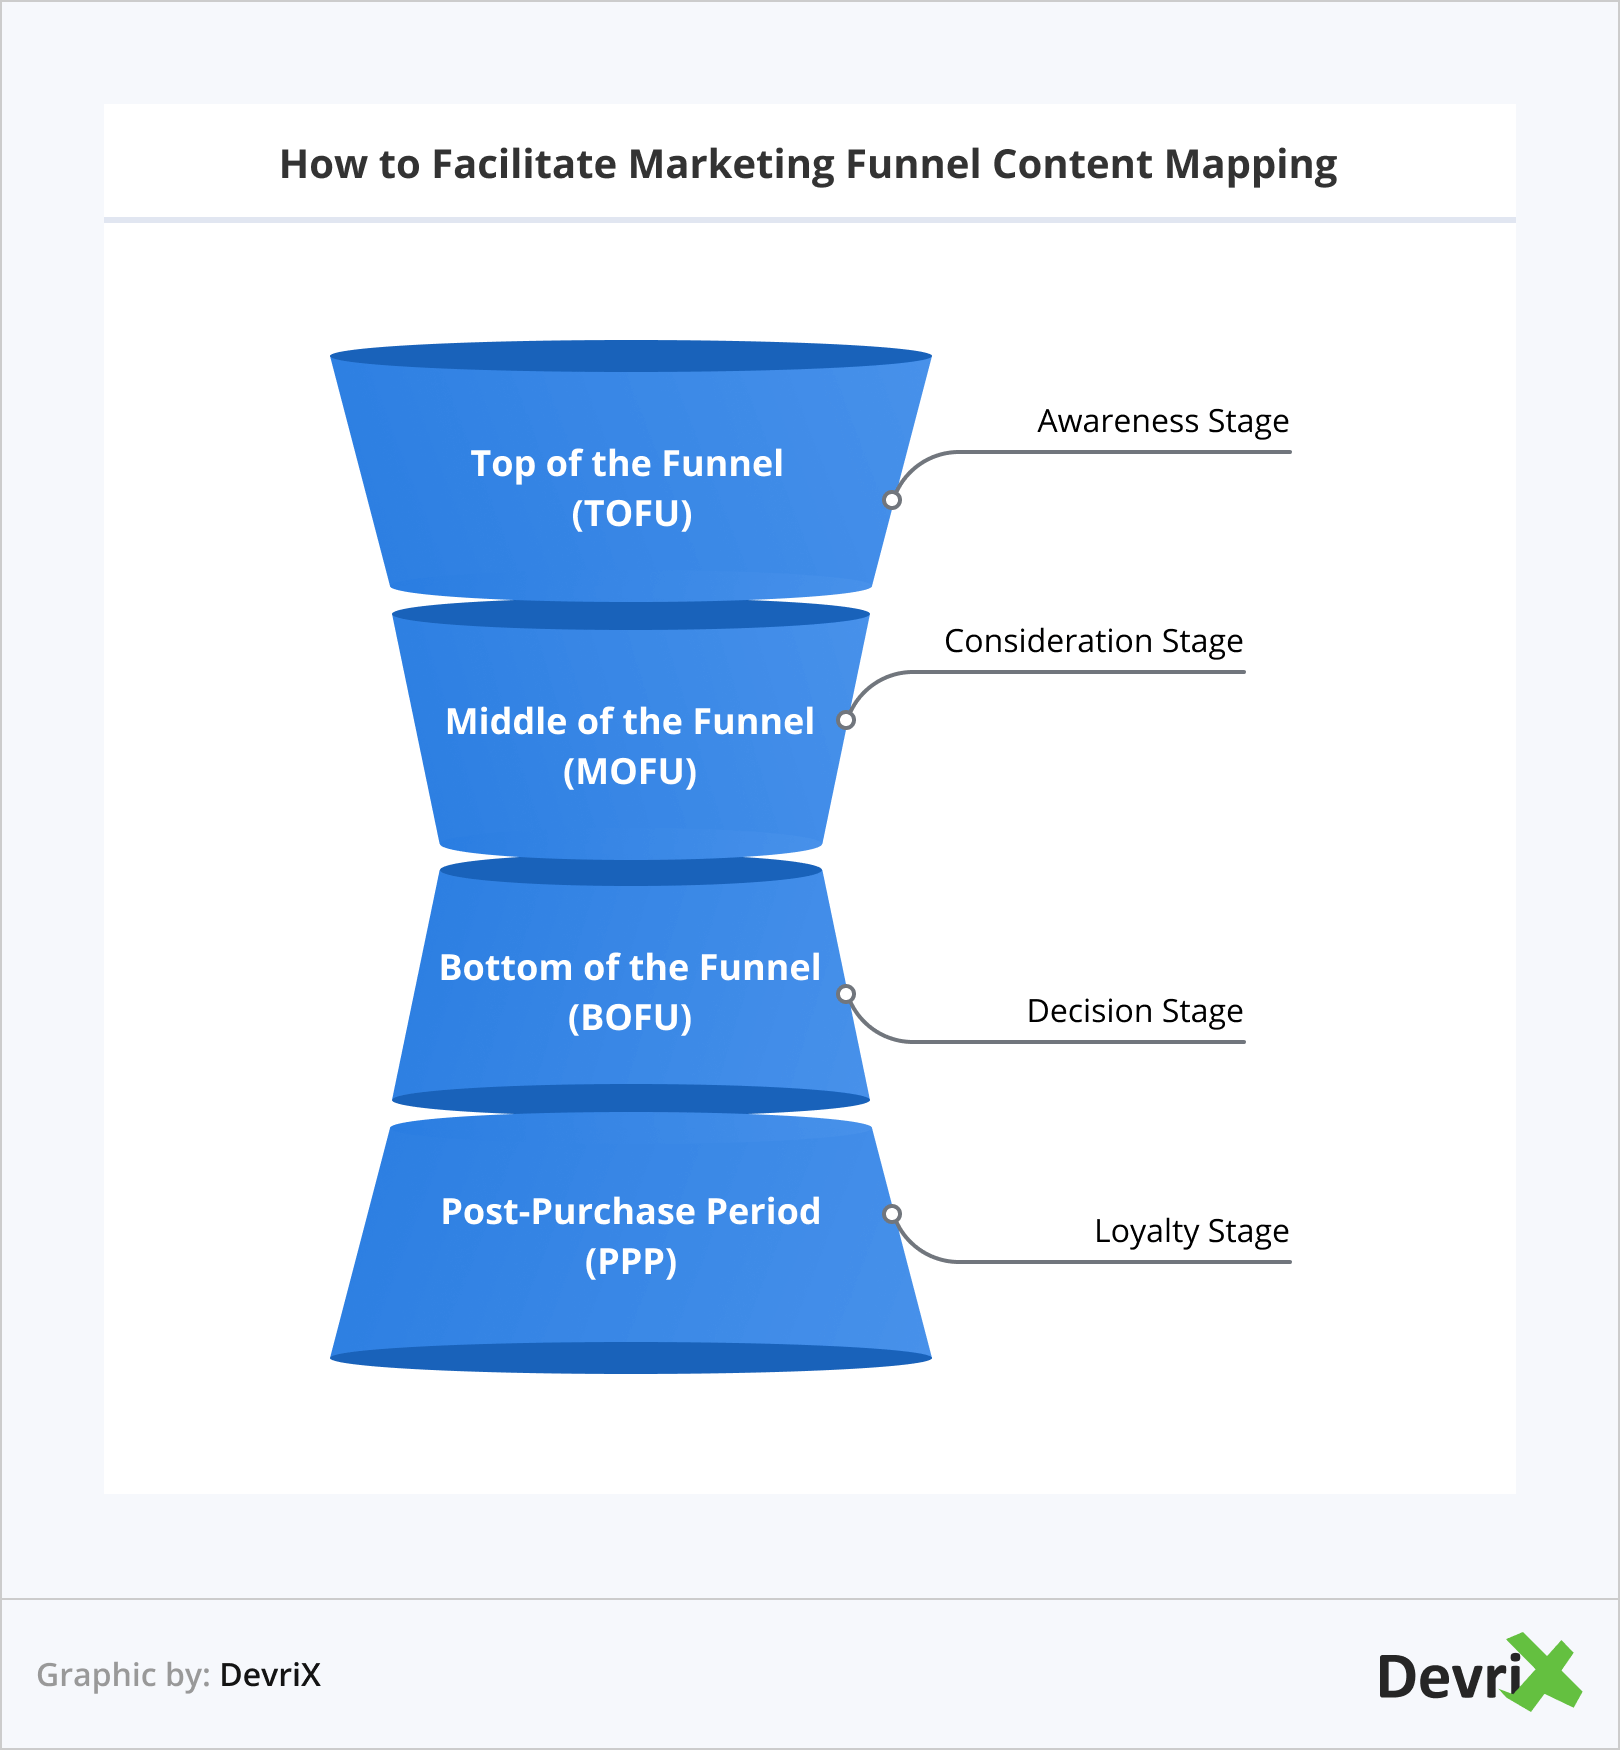 How to Facilitate Marketing Funnel Content Mapping